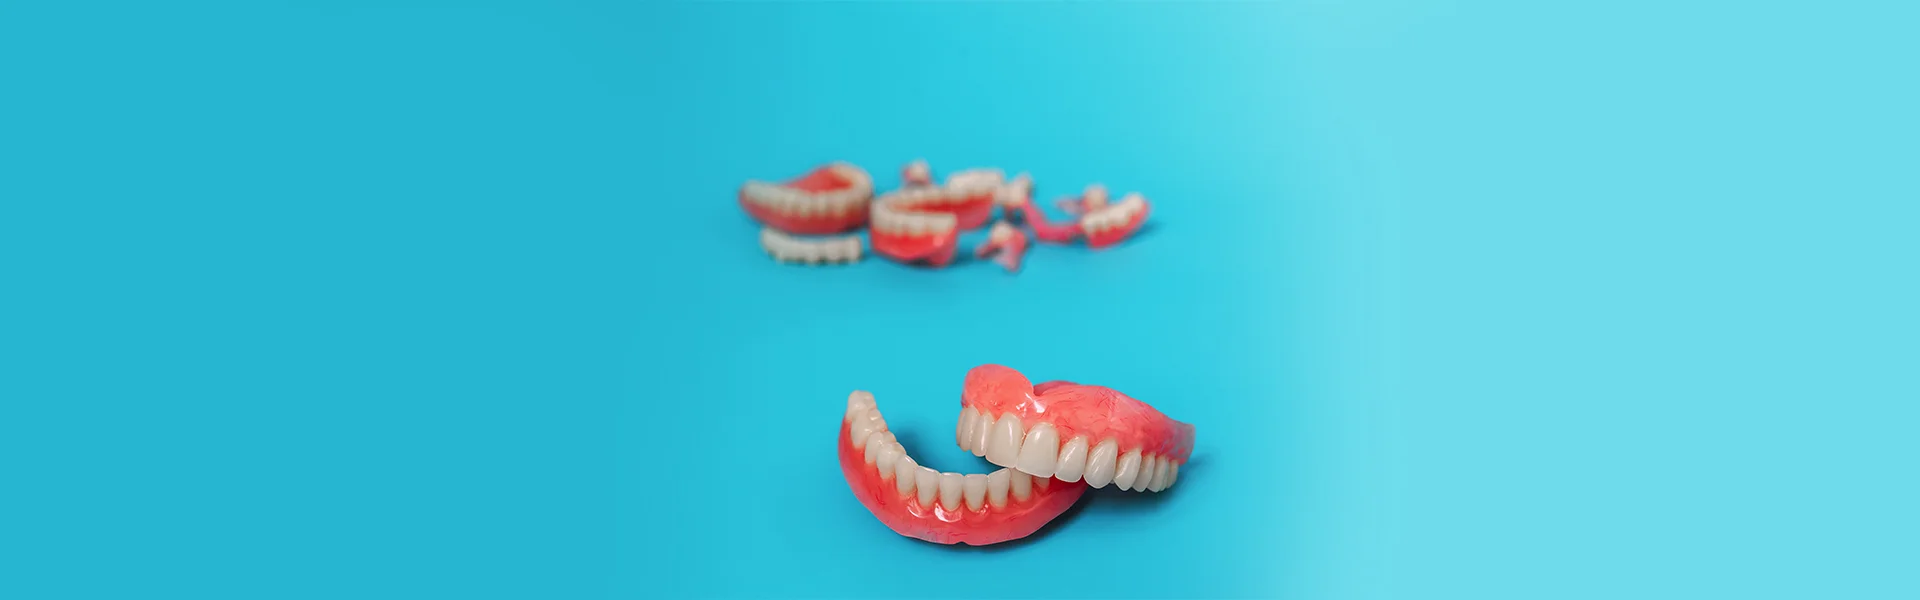 What To Expect When Wearing Partial Dentures for The First Time